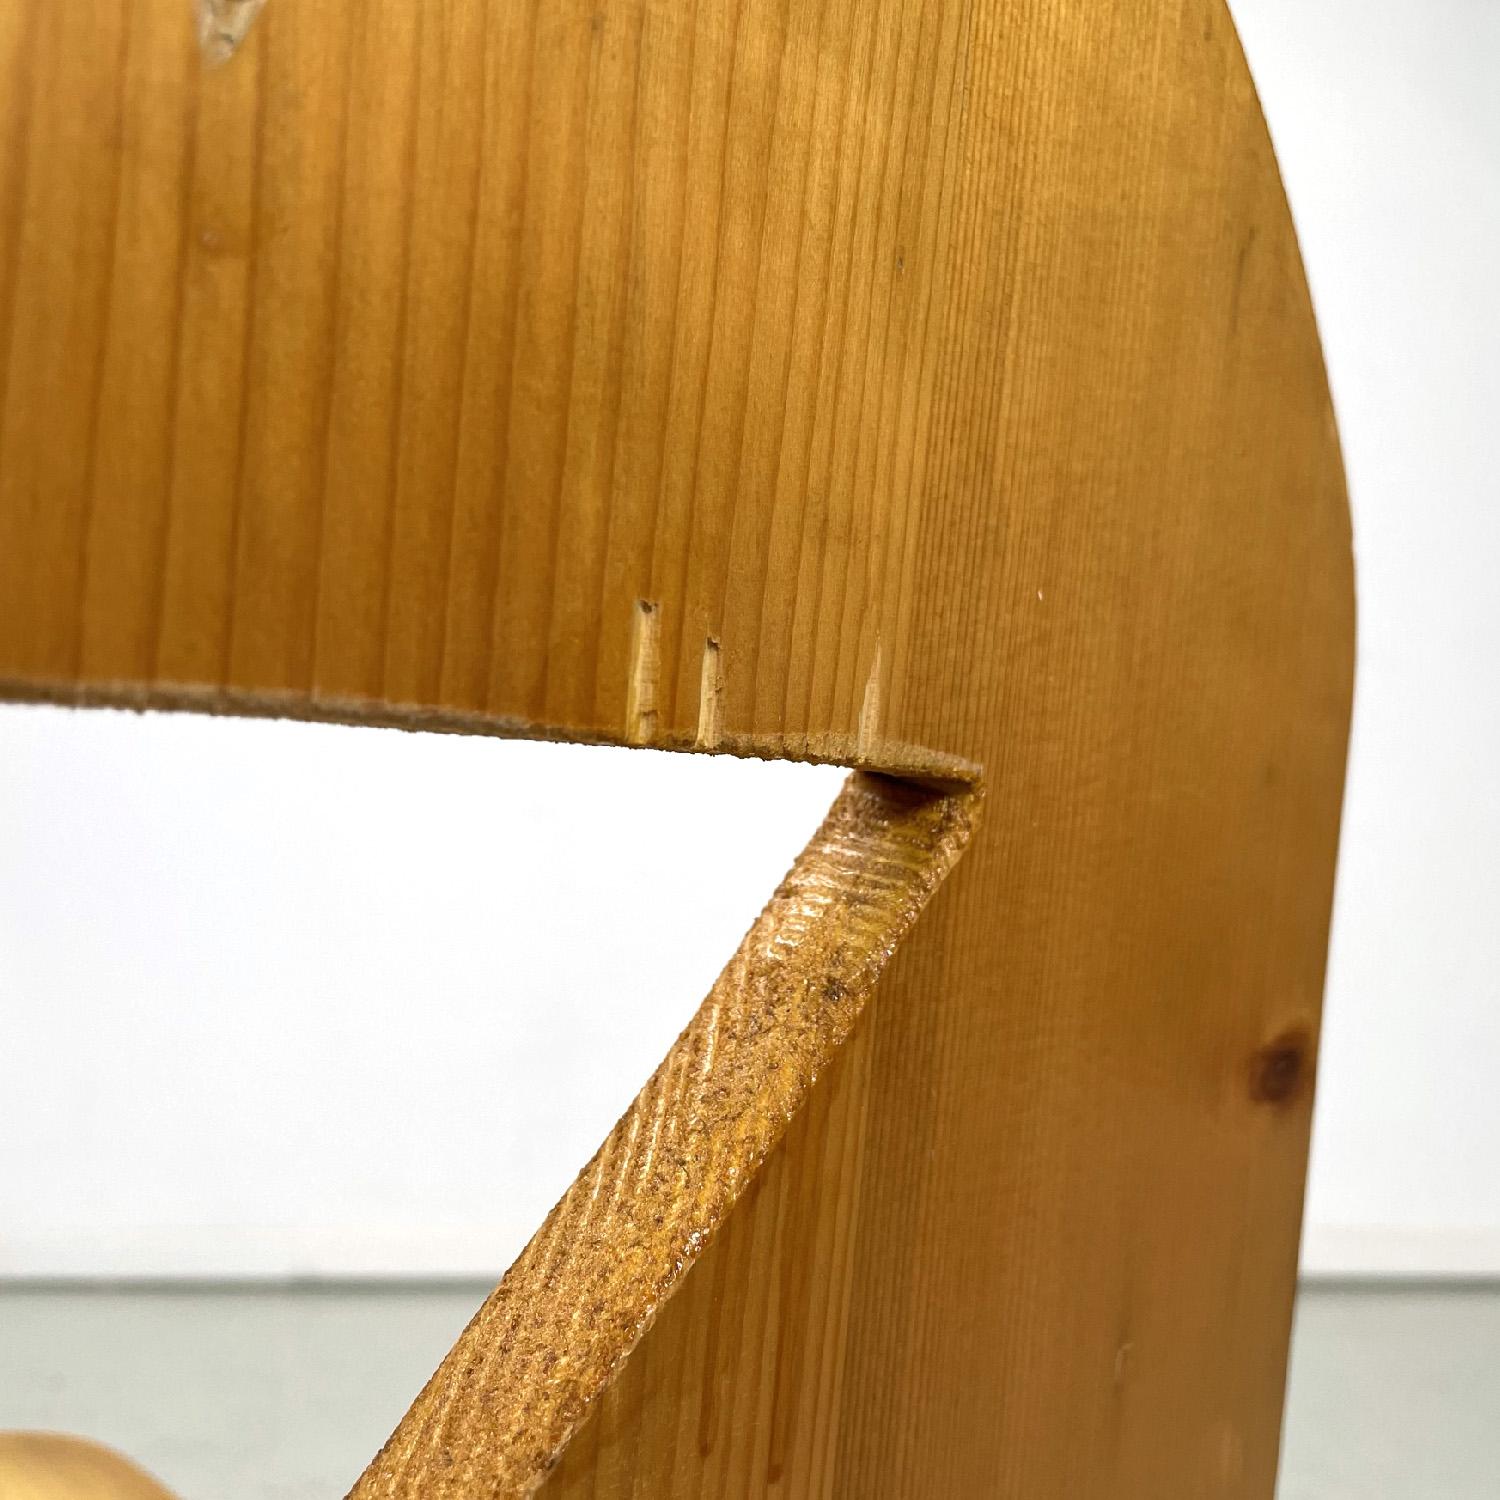 Italian modern wooden chairs with triangular holes, 1980s For Sale 5